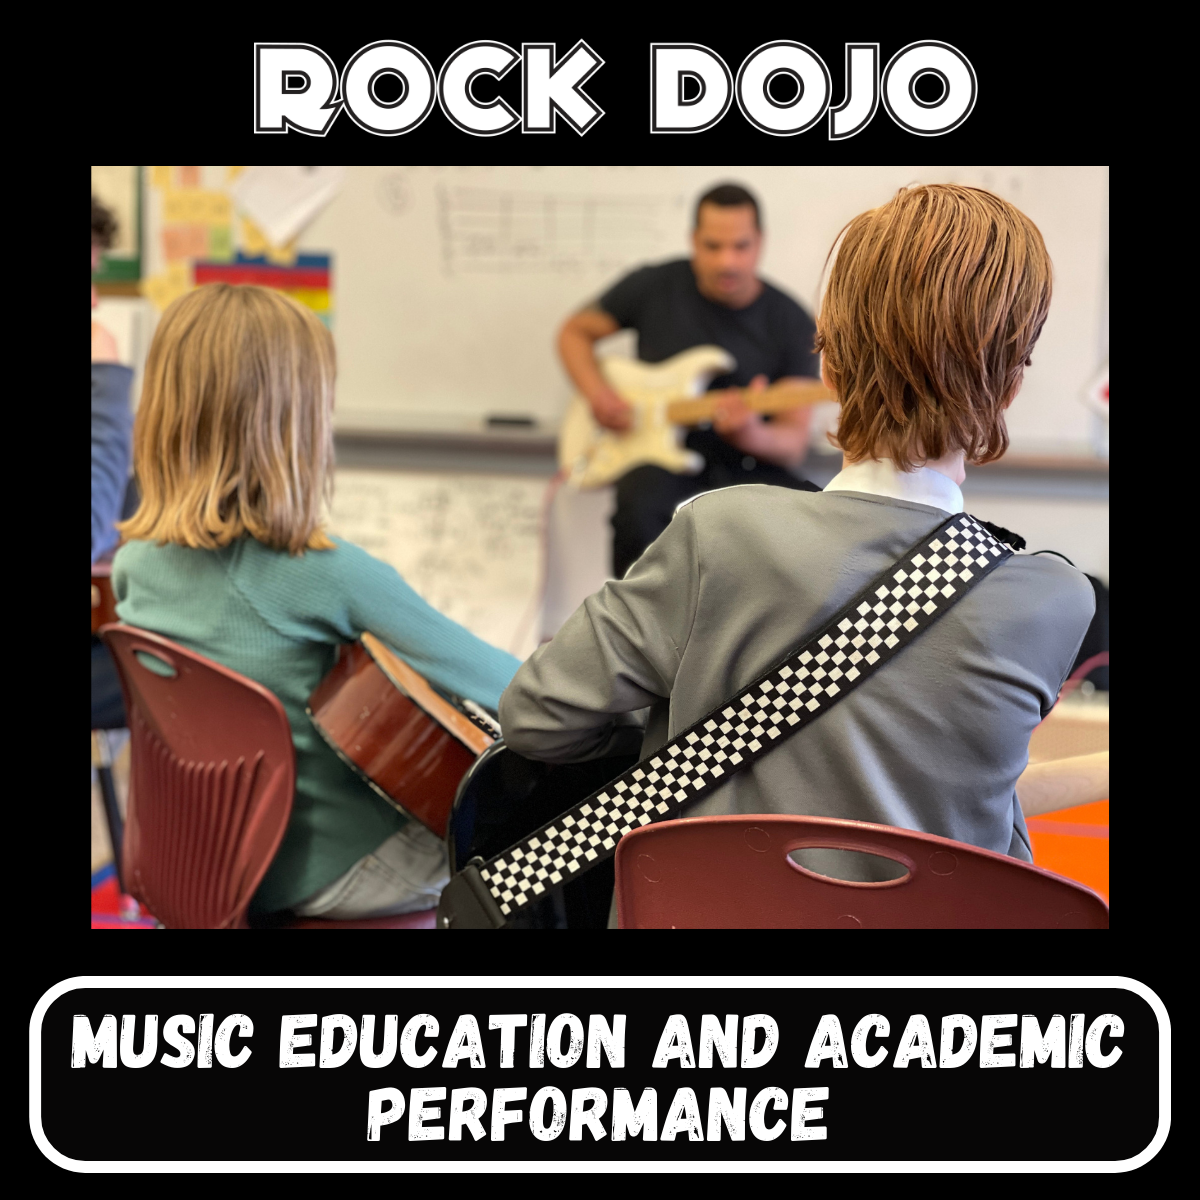 Children seating in a classroom during a Rock Dojo Guitar After-School class are focusing on the teacher demonstrating a concept on the guitar